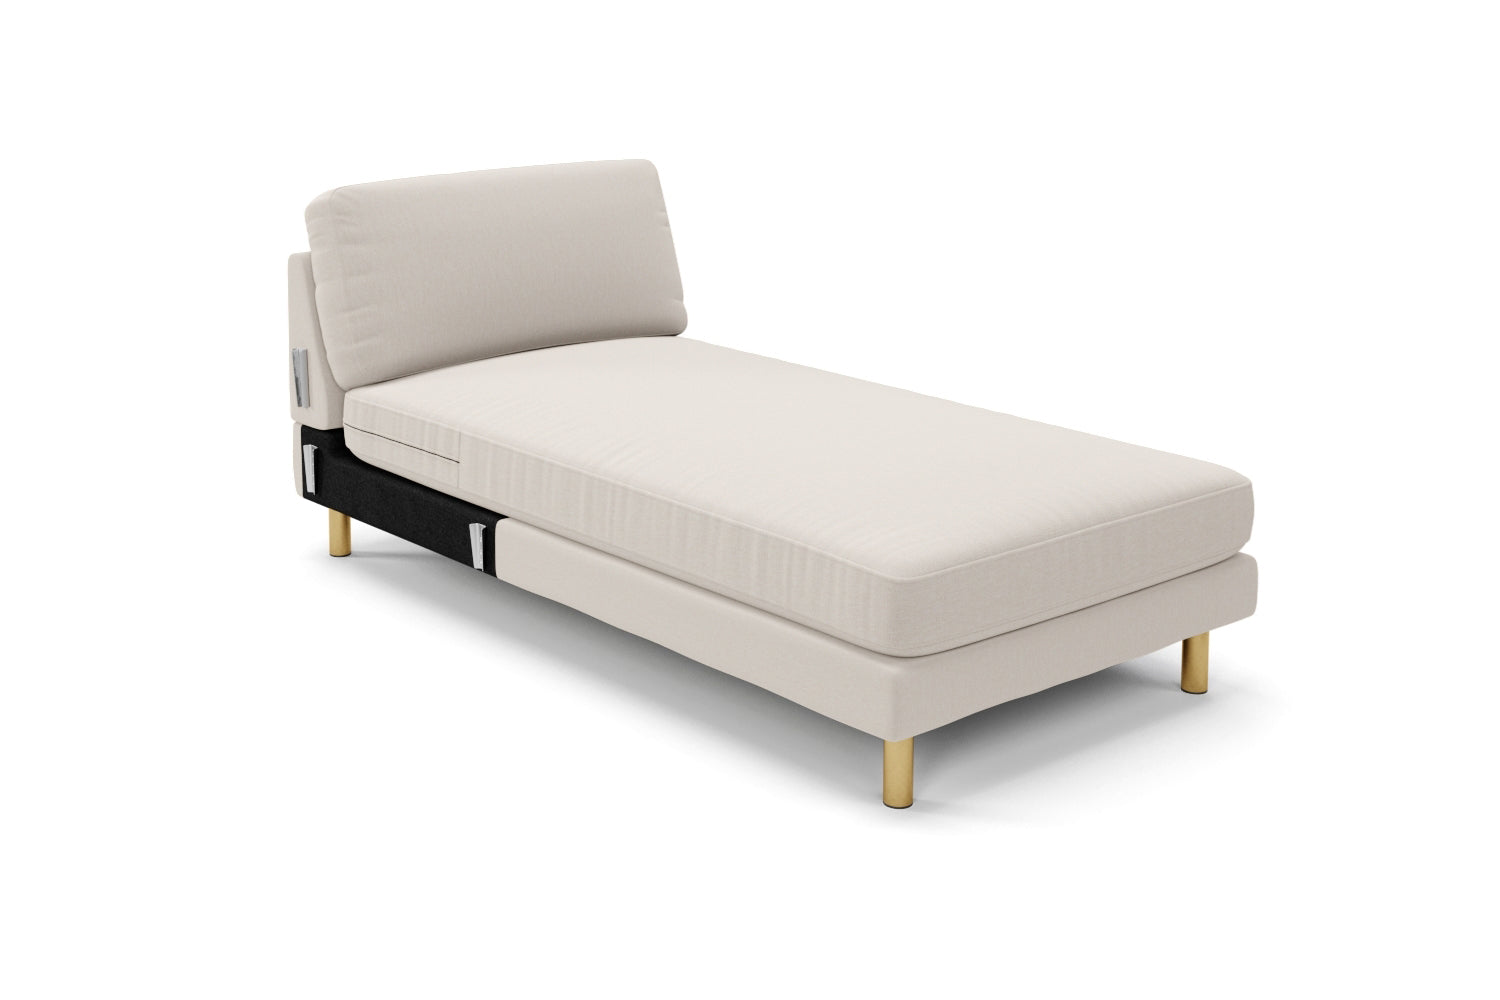 The Big Chill - Left Hand Chaise Unit - Biscuit